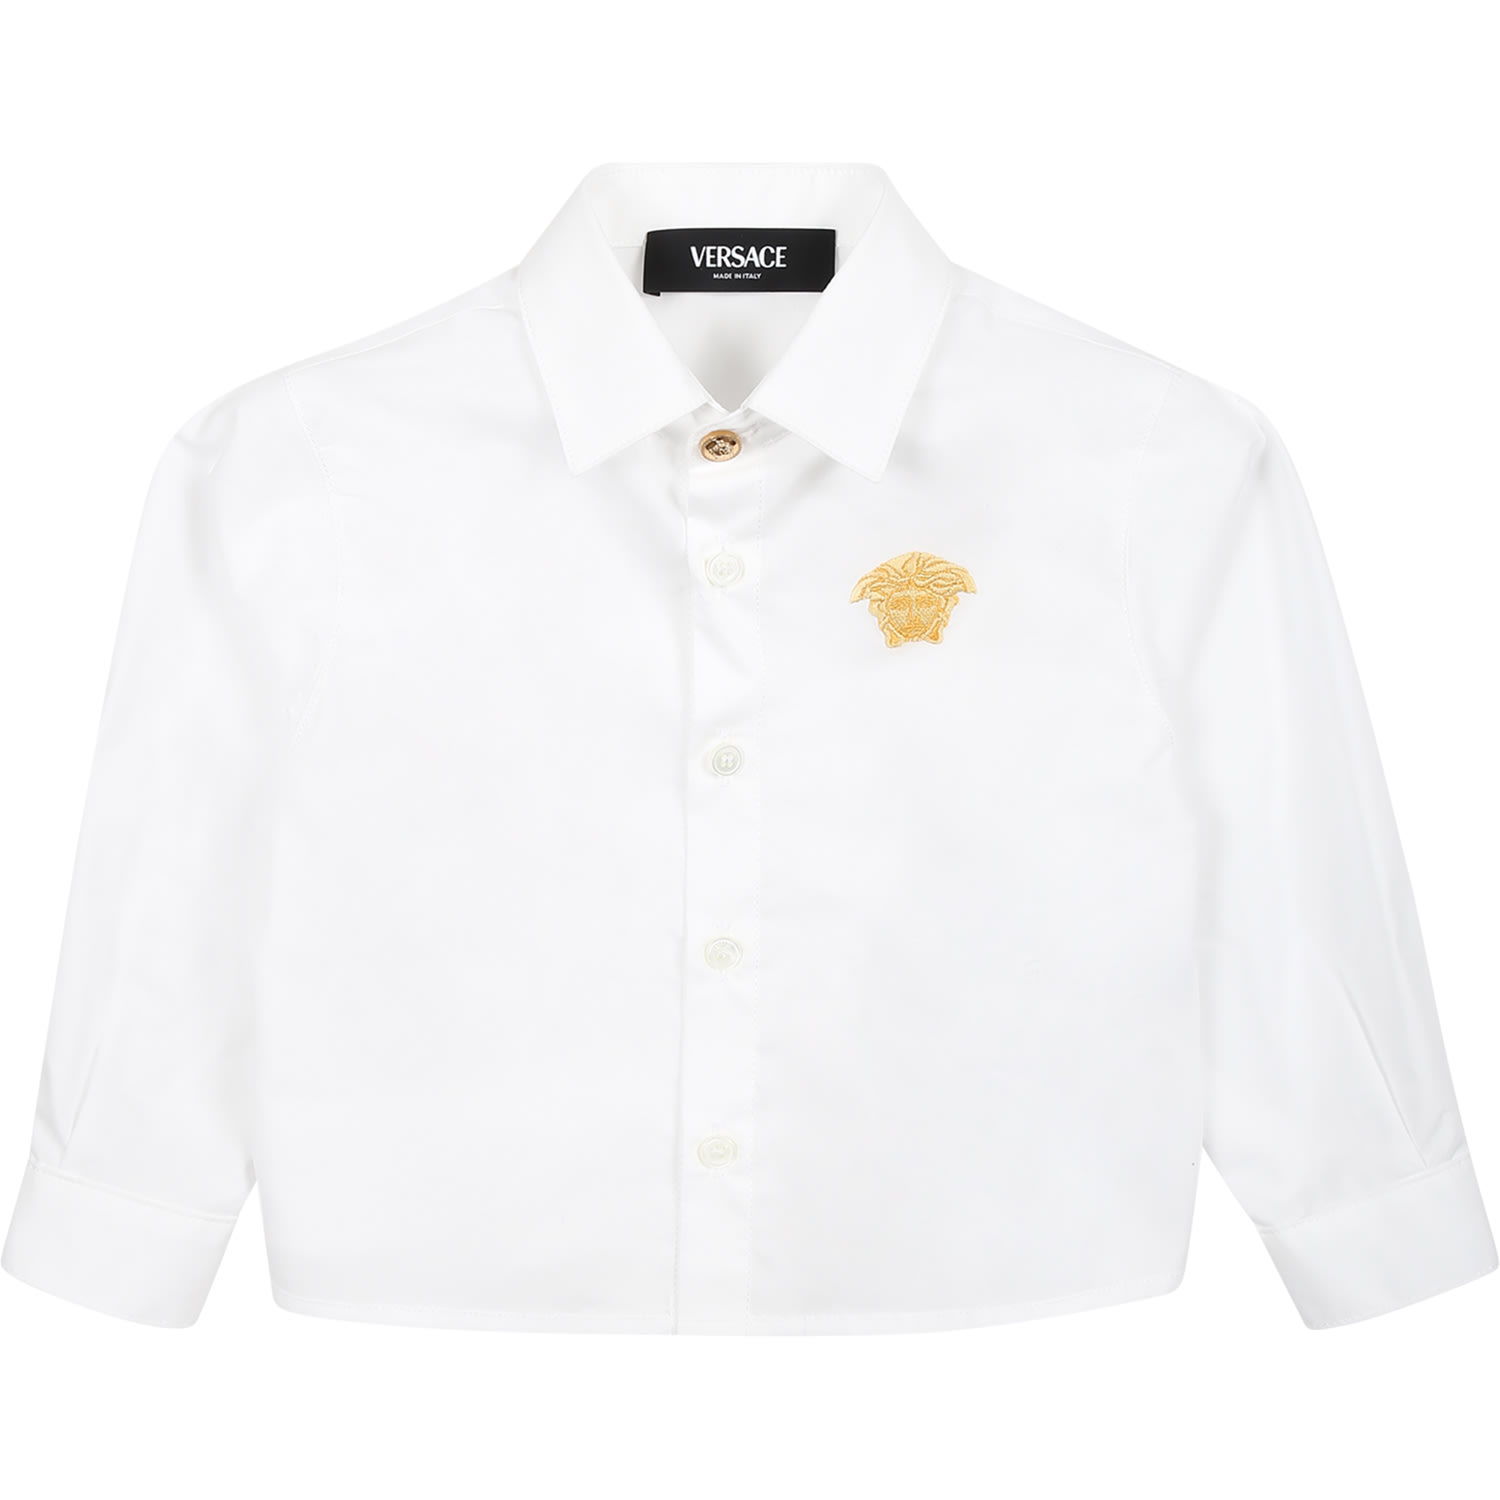 Versace White Shirt For Baby Boy With Iconic Medusa